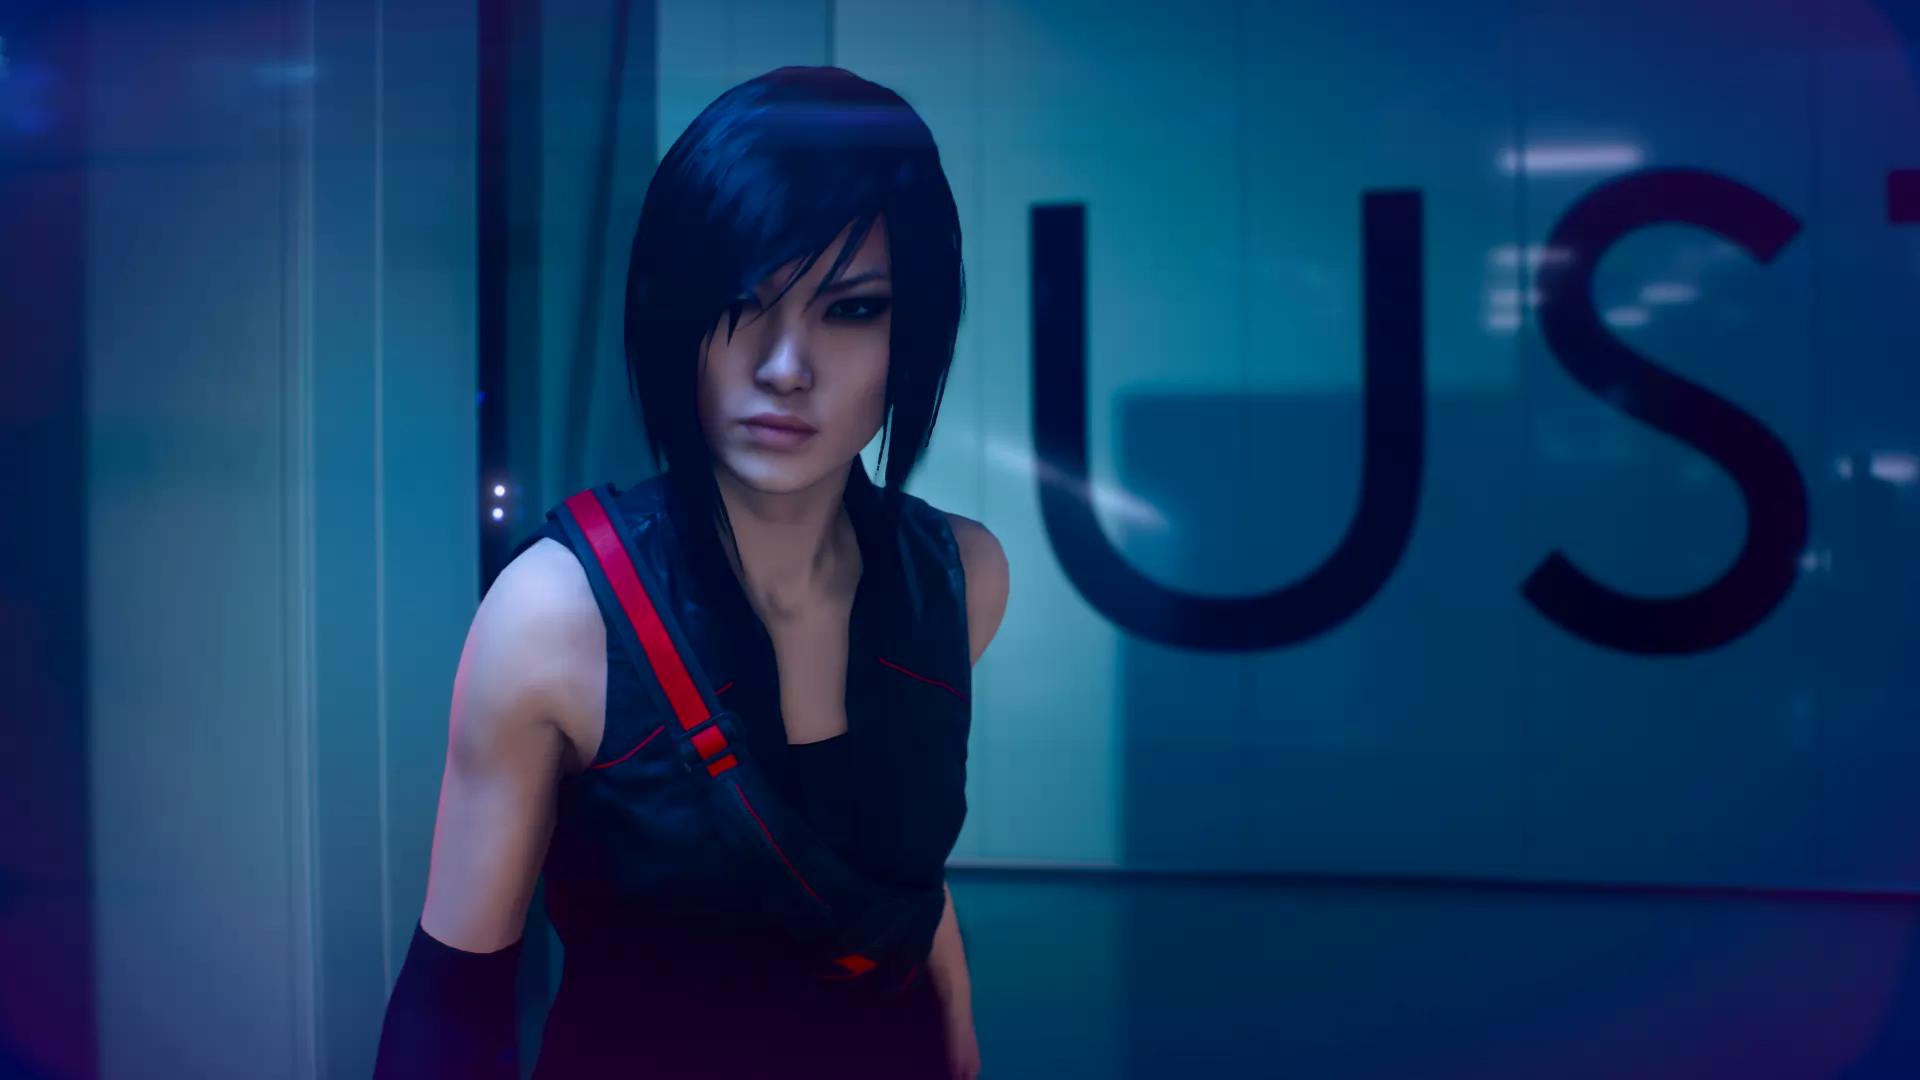 Mirror's Edge Catalyst Faith Connors 4K Wallpapers, HD Wallpapers